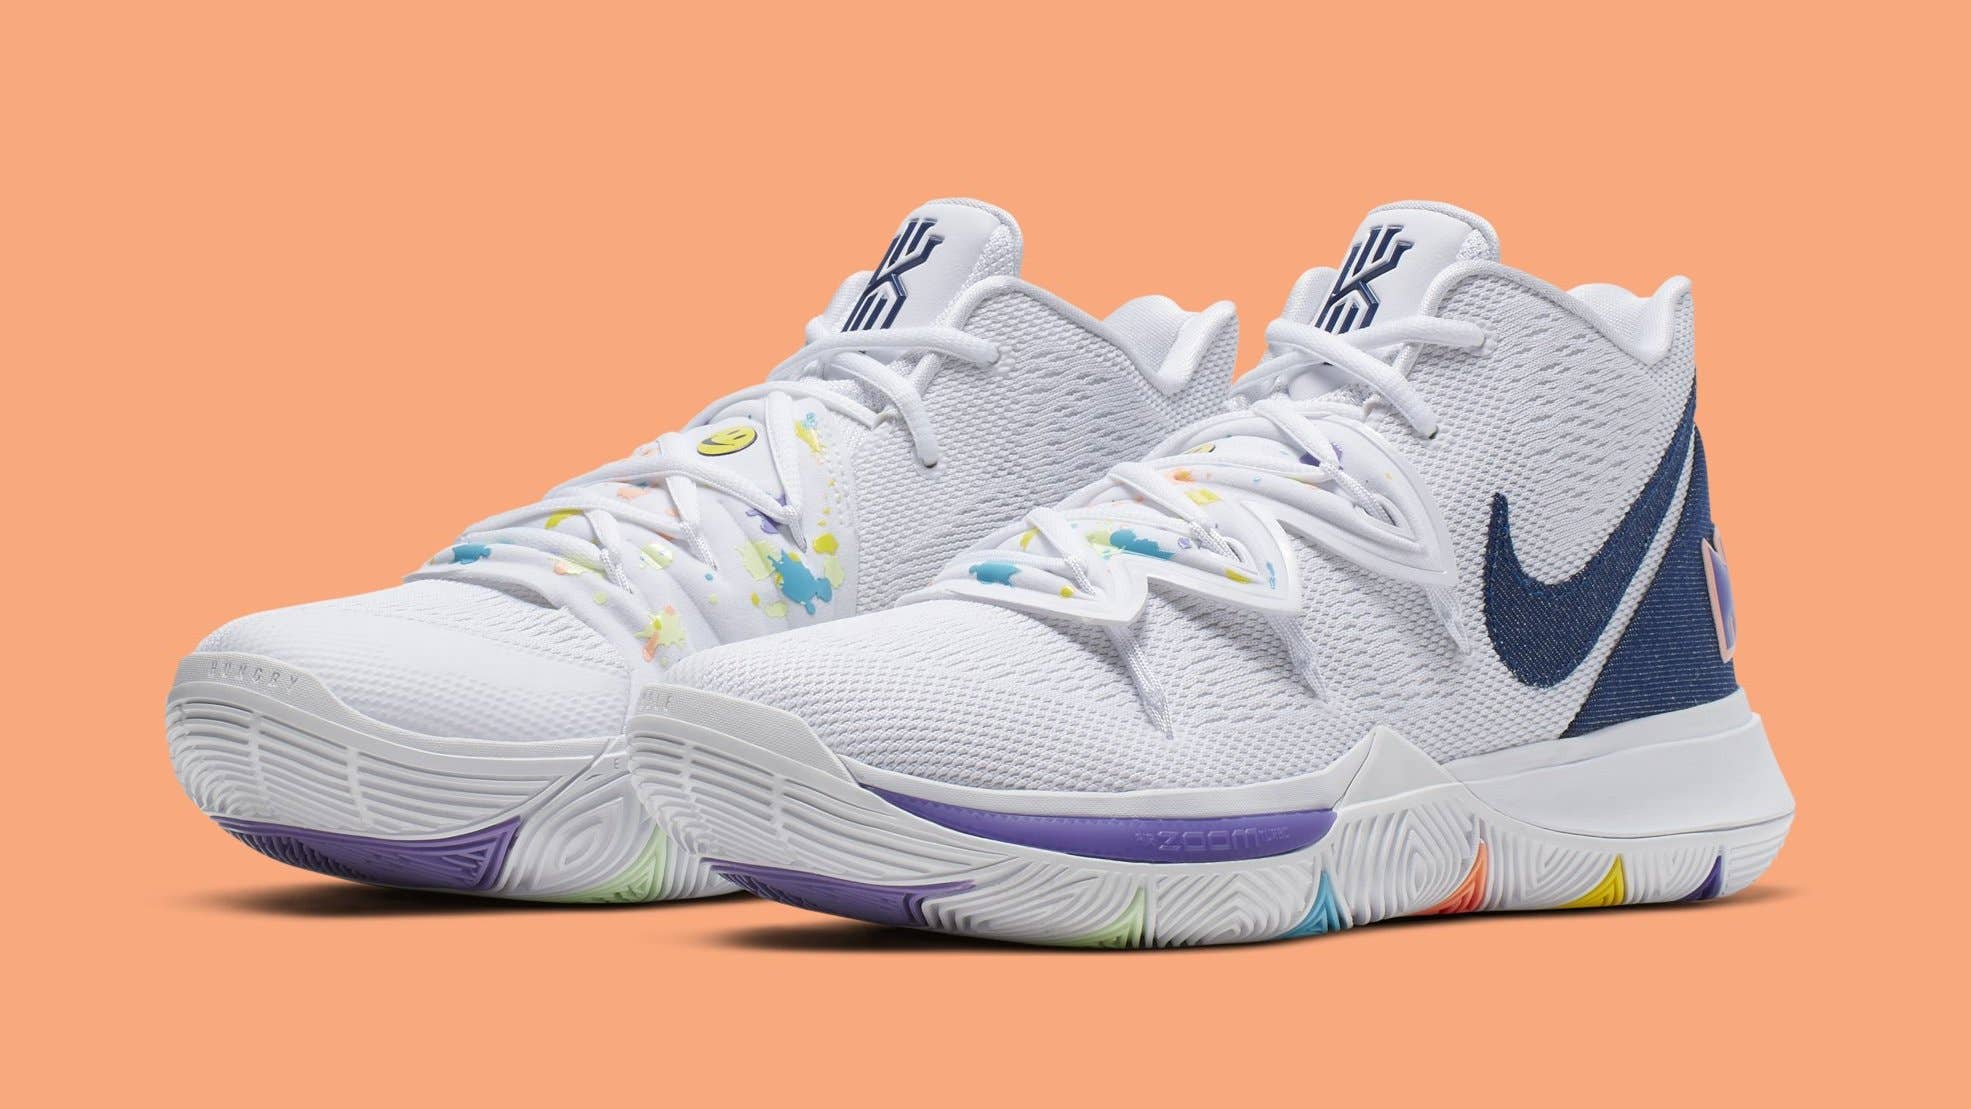 Release Details For The 'Have A Nike Day' Kyrie 5 | Complex